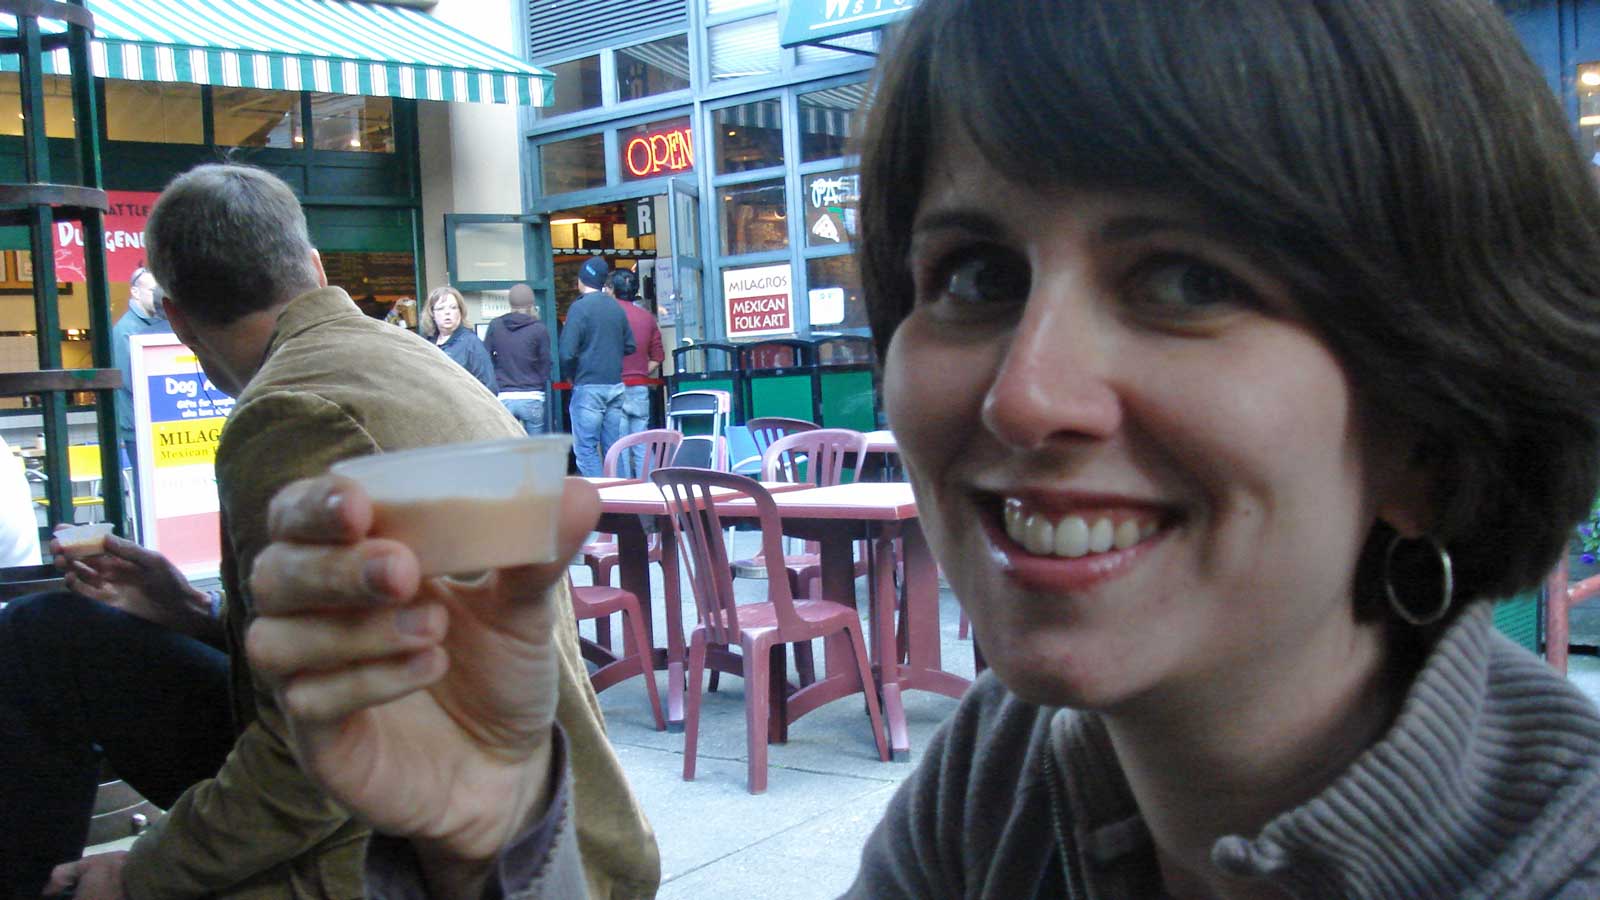 Rebecca holding a small serving of clam chowder